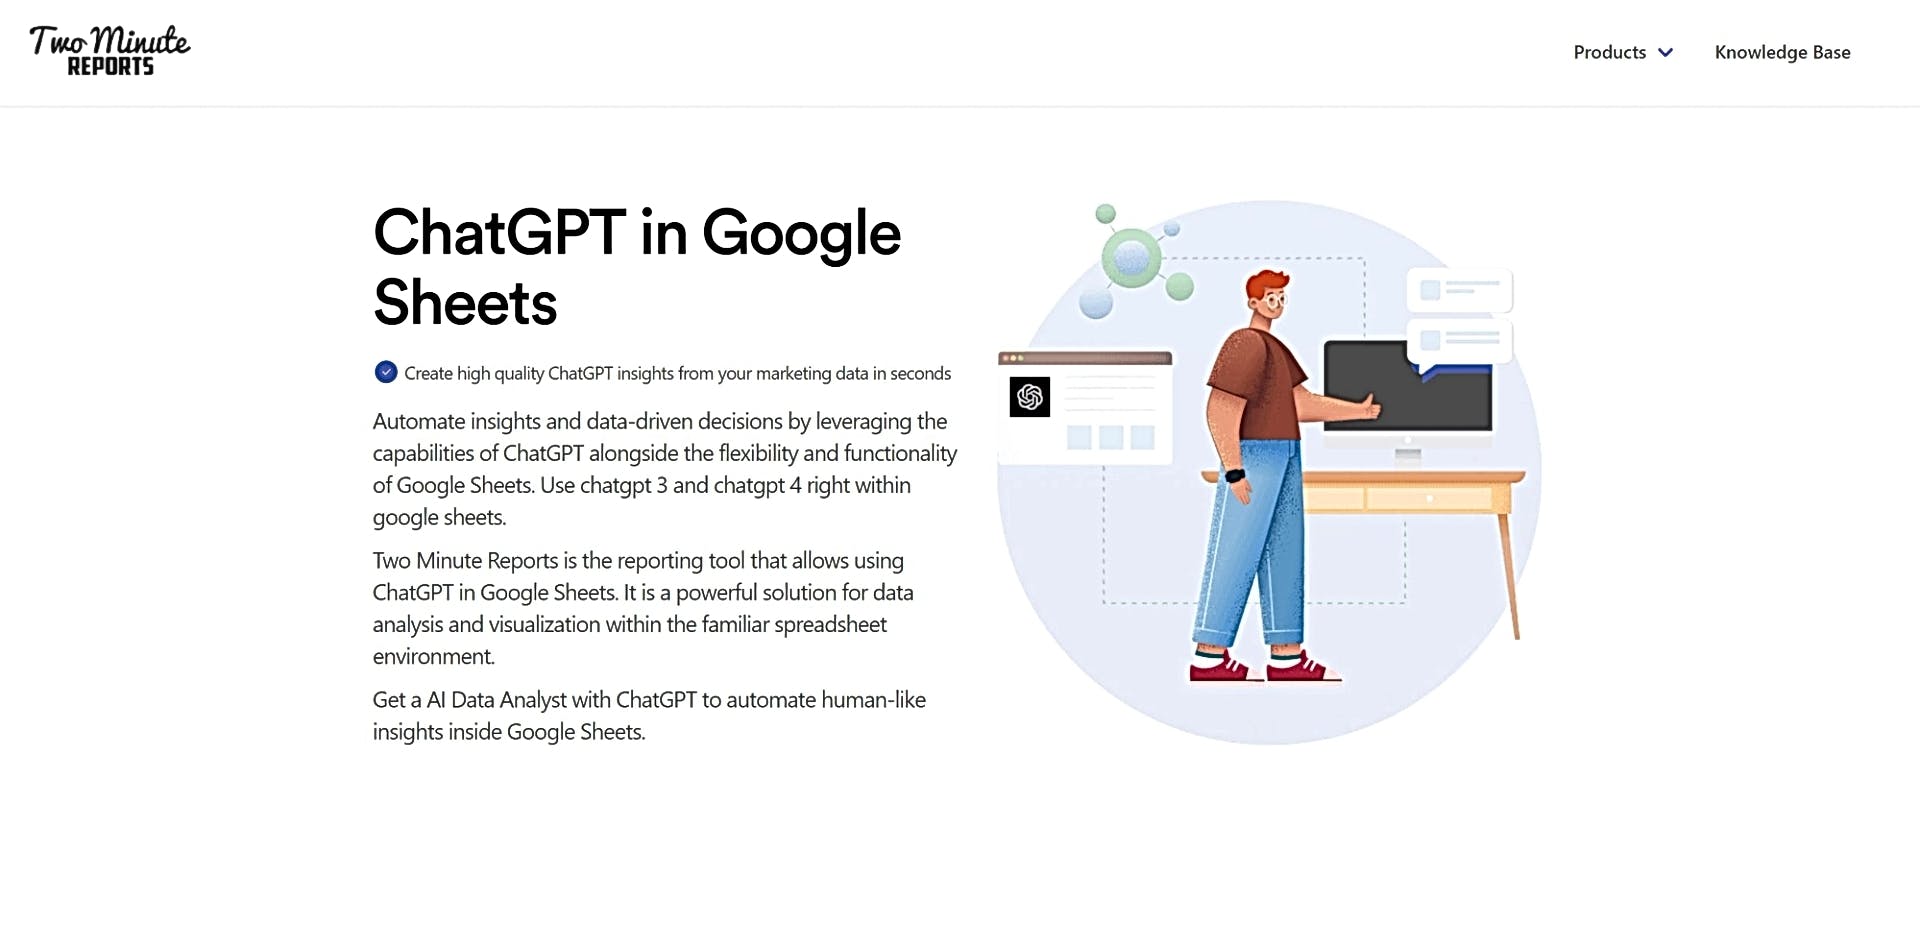 ChatGPT in Google Sheets featured